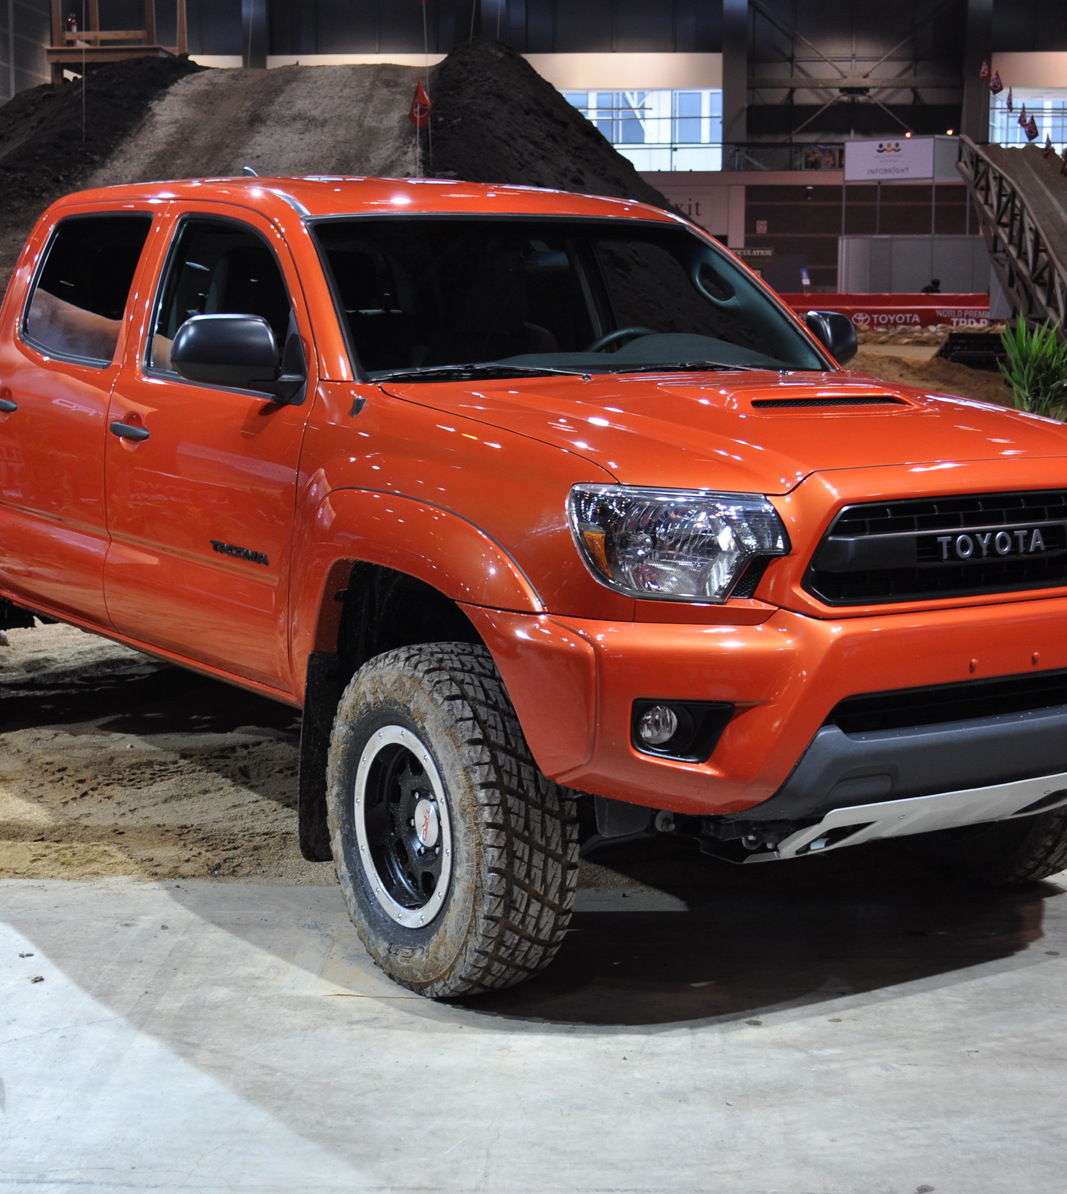 TRD Pro Series a reminder that Toyota still does trucks